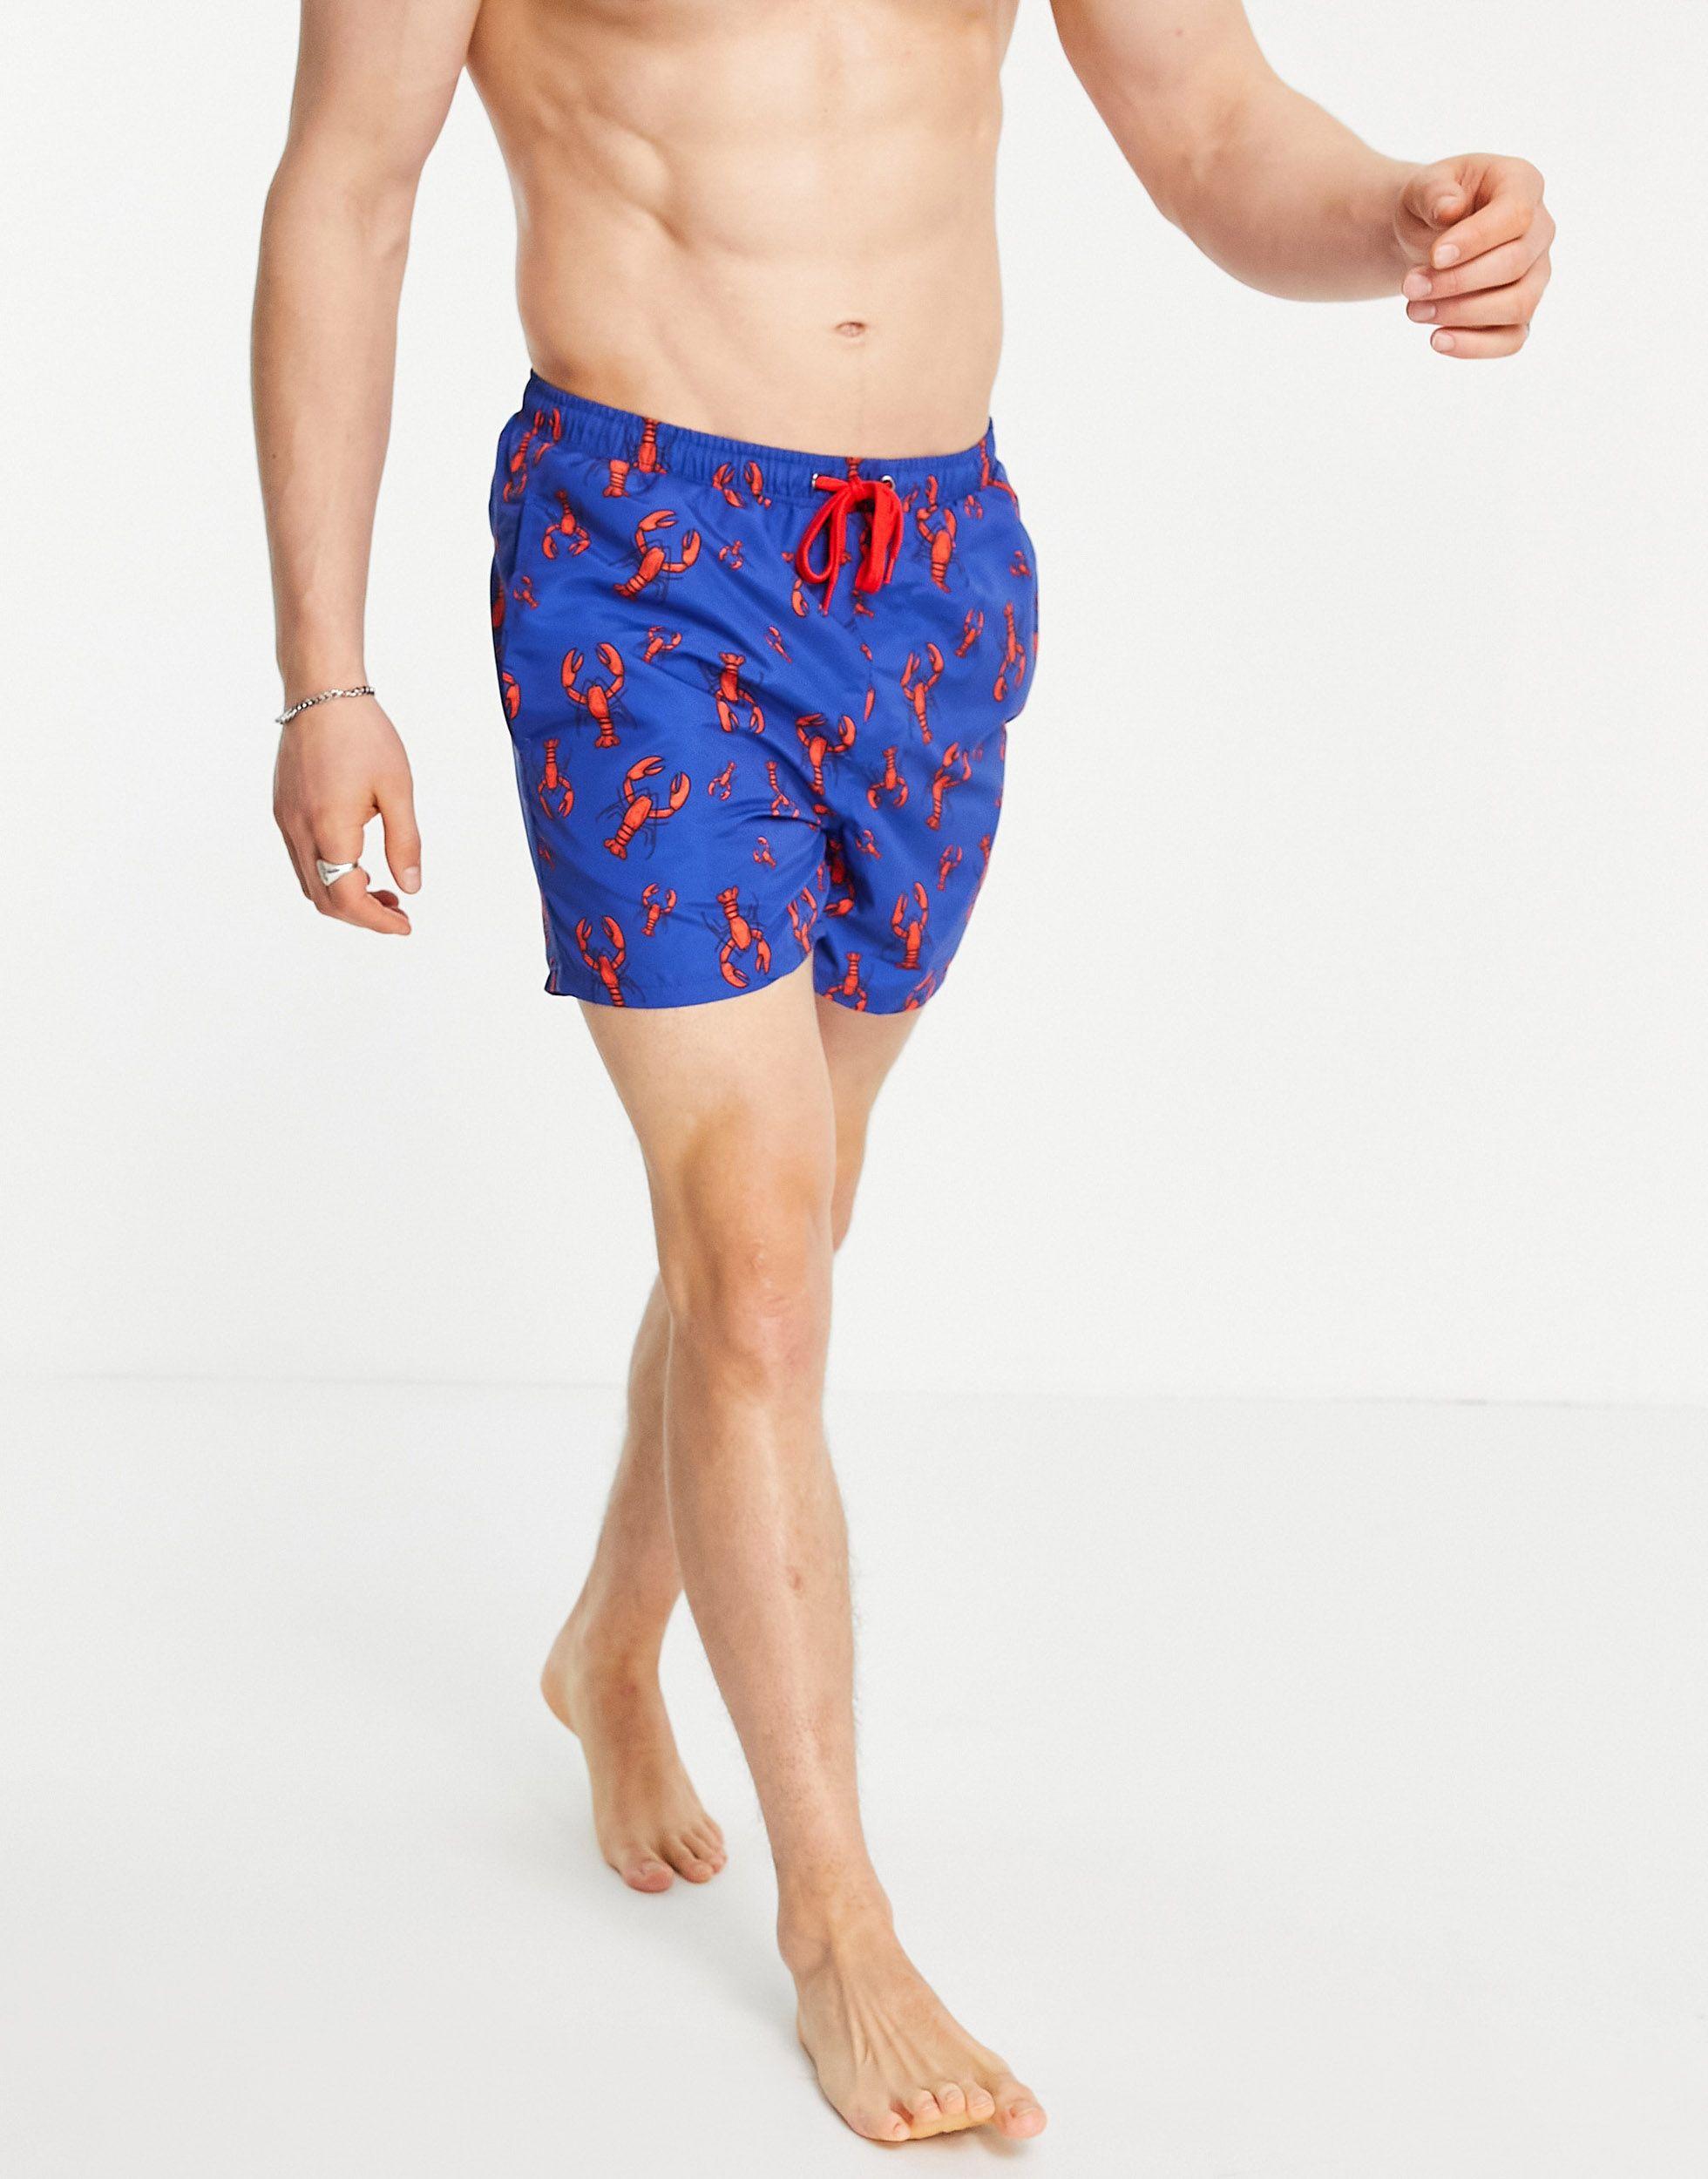 Only & Sons Lobster Print Swim Shorts in Blue for Men - Lyst